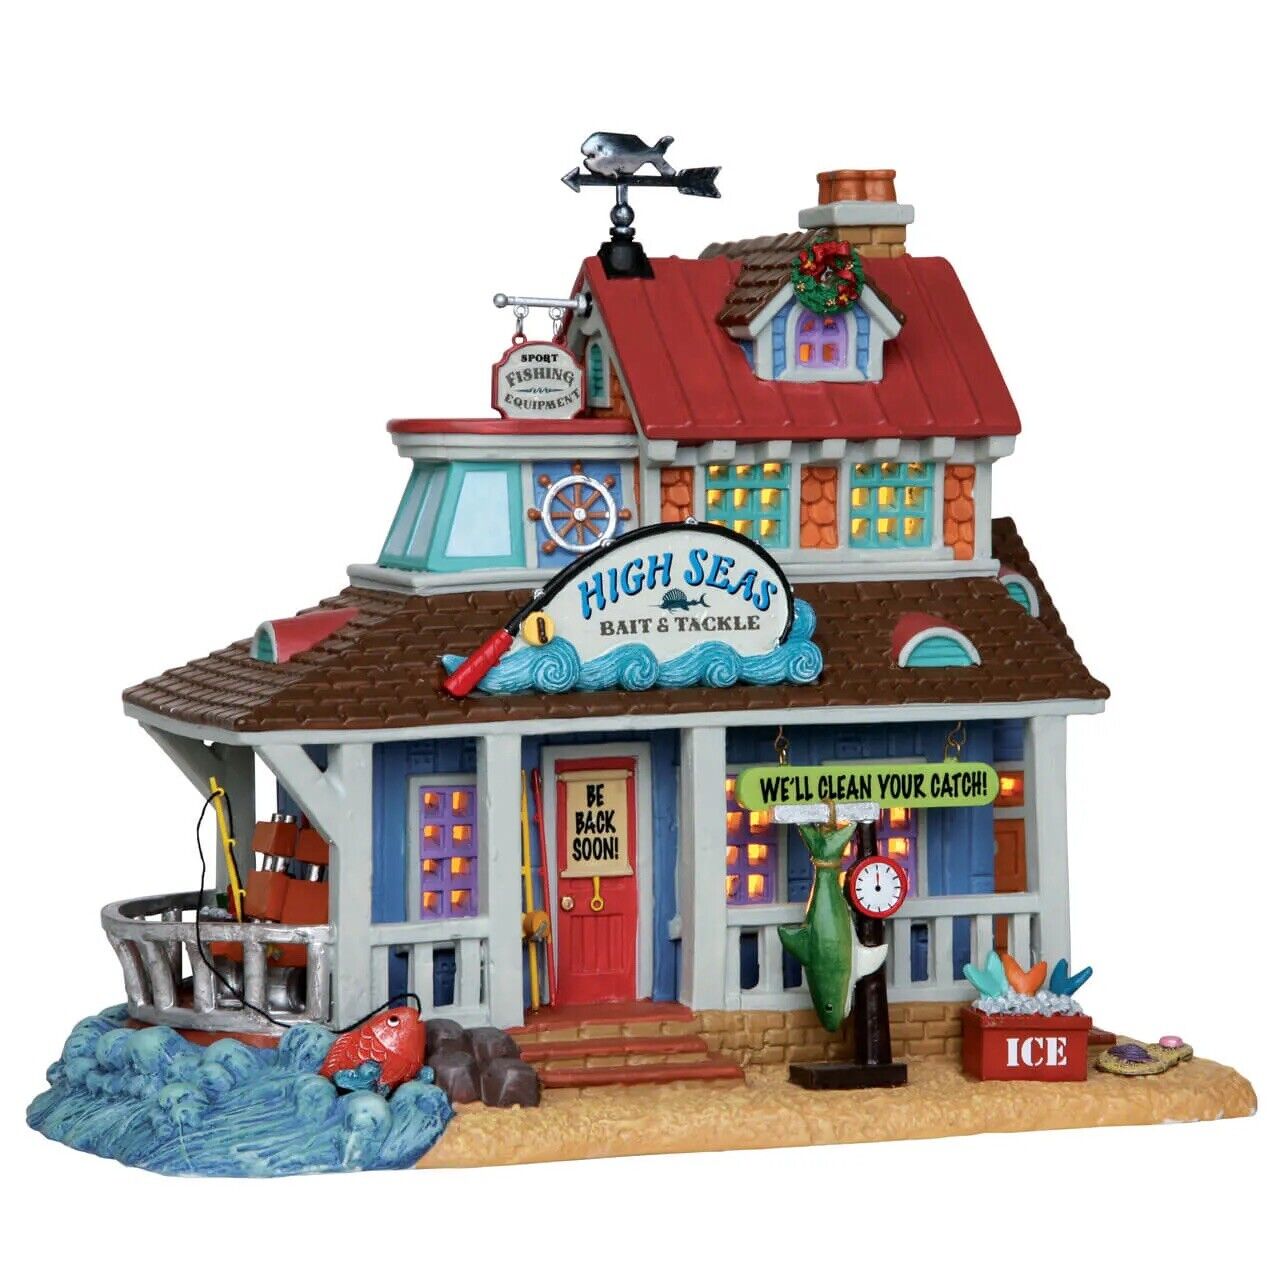 New LEMAX Holiday Village High Seas Bait & Tackle #25361